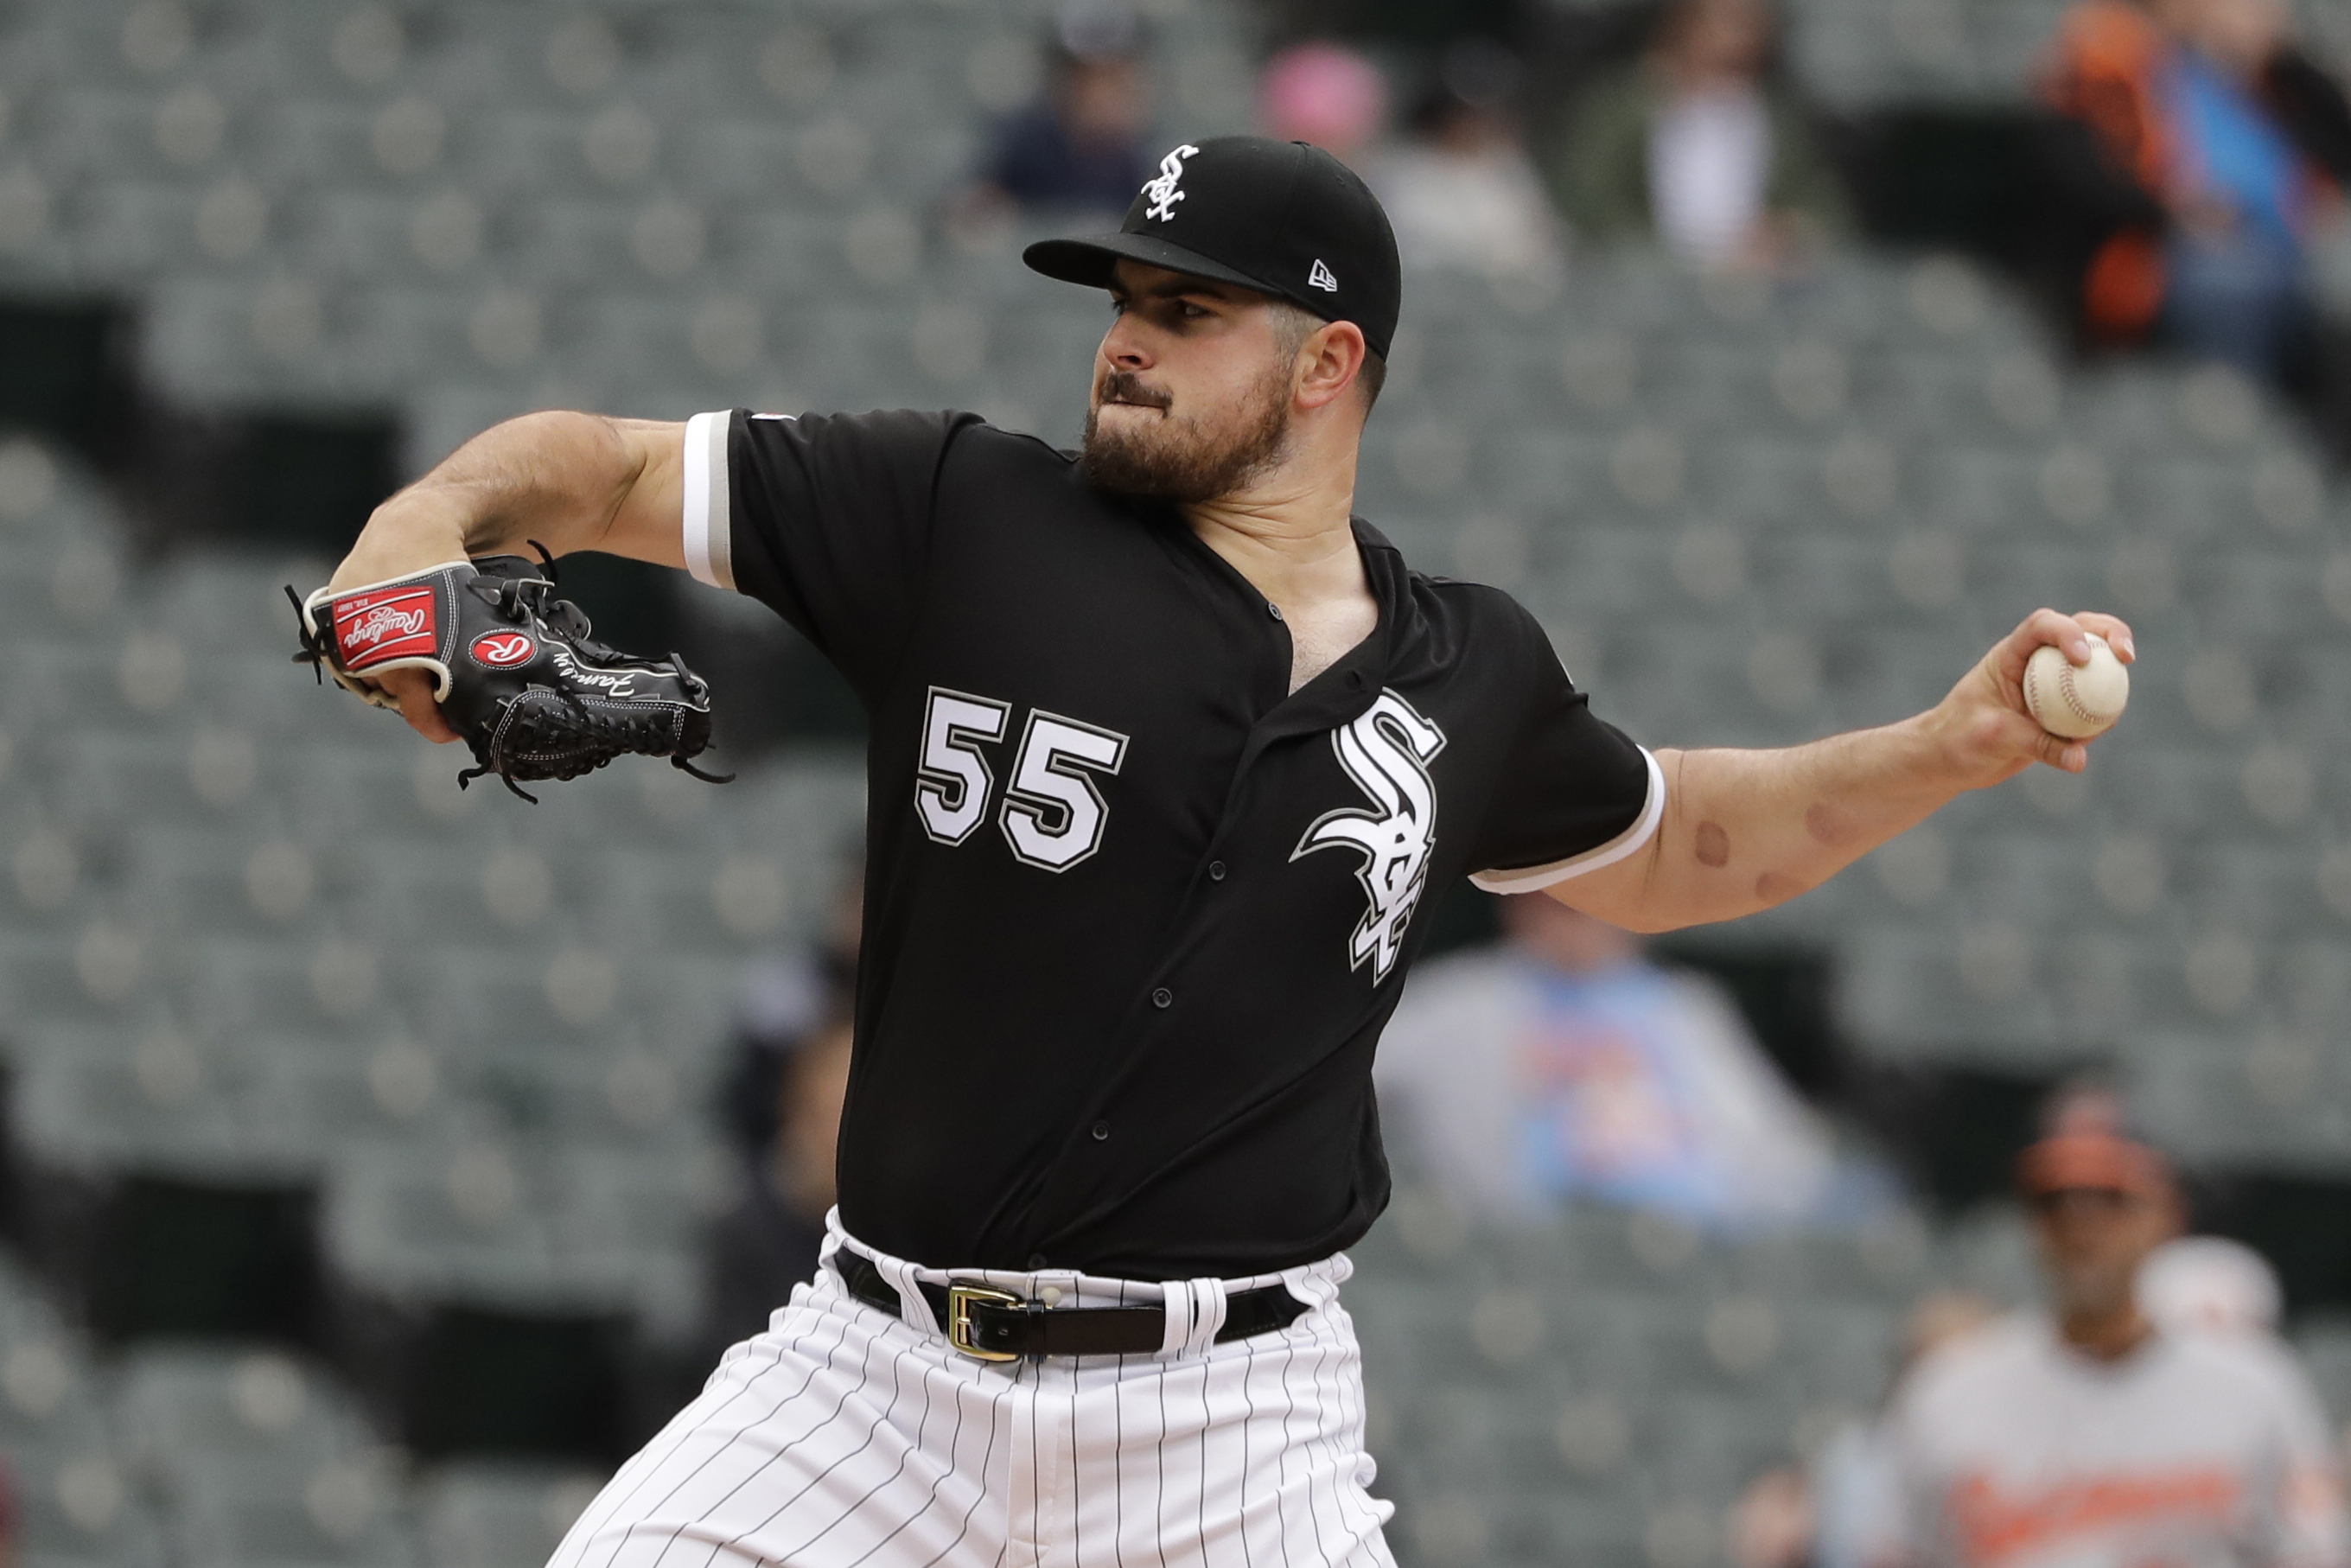 After John Means undergoes successful Tommy John surgery, Mike